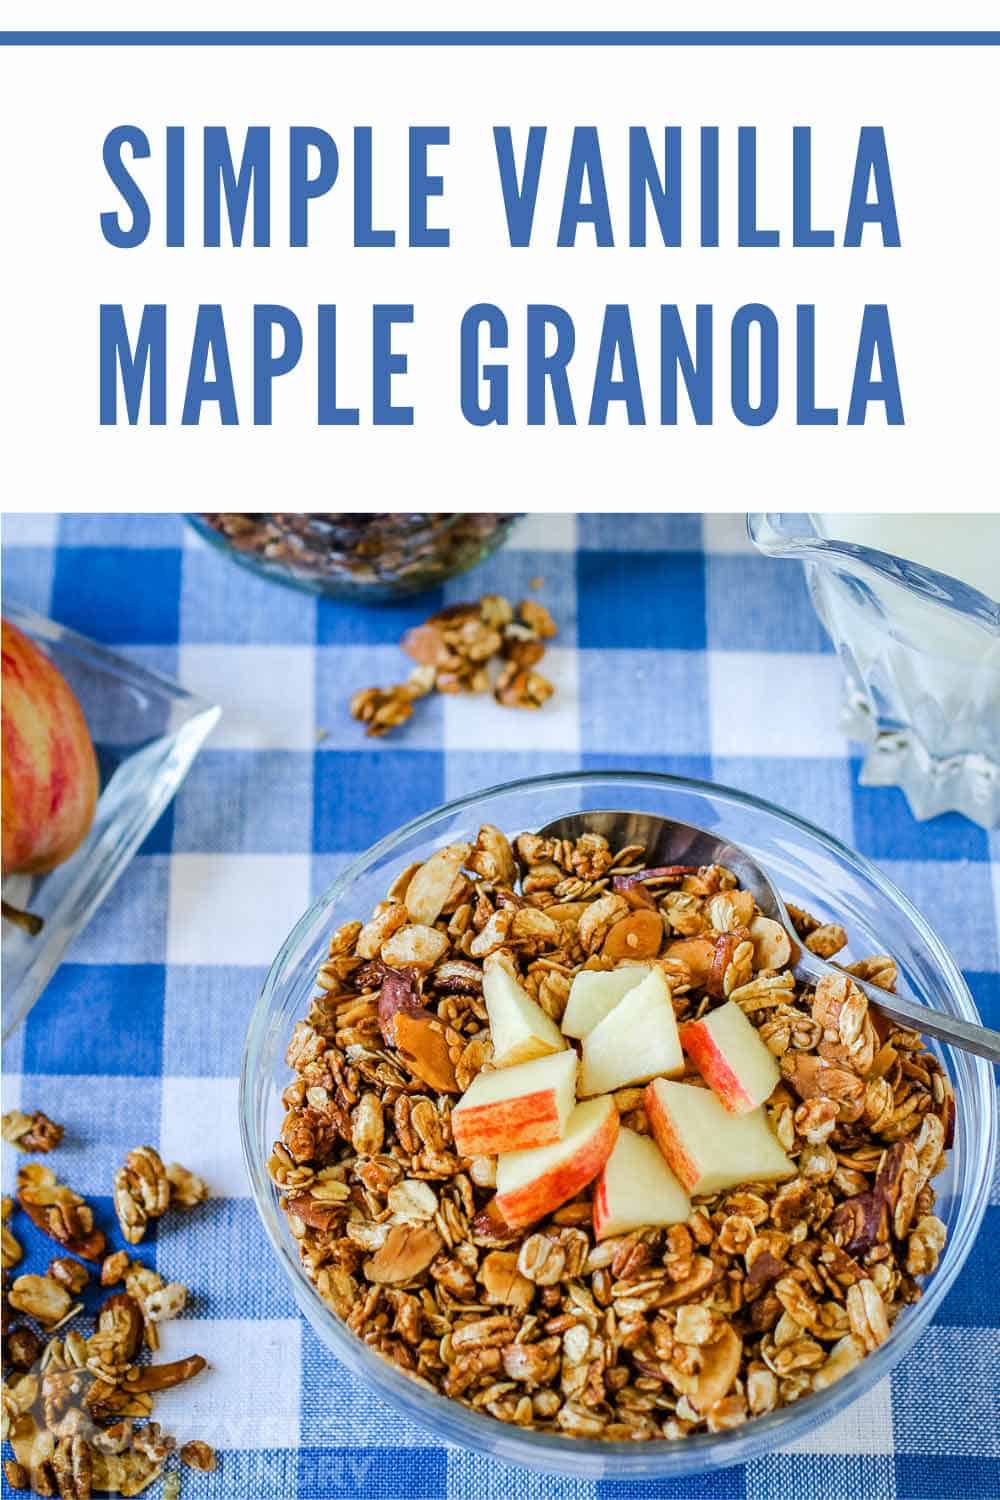 Overhead view of a bowl of granola with chopped apples on a blue checked tablecloth.